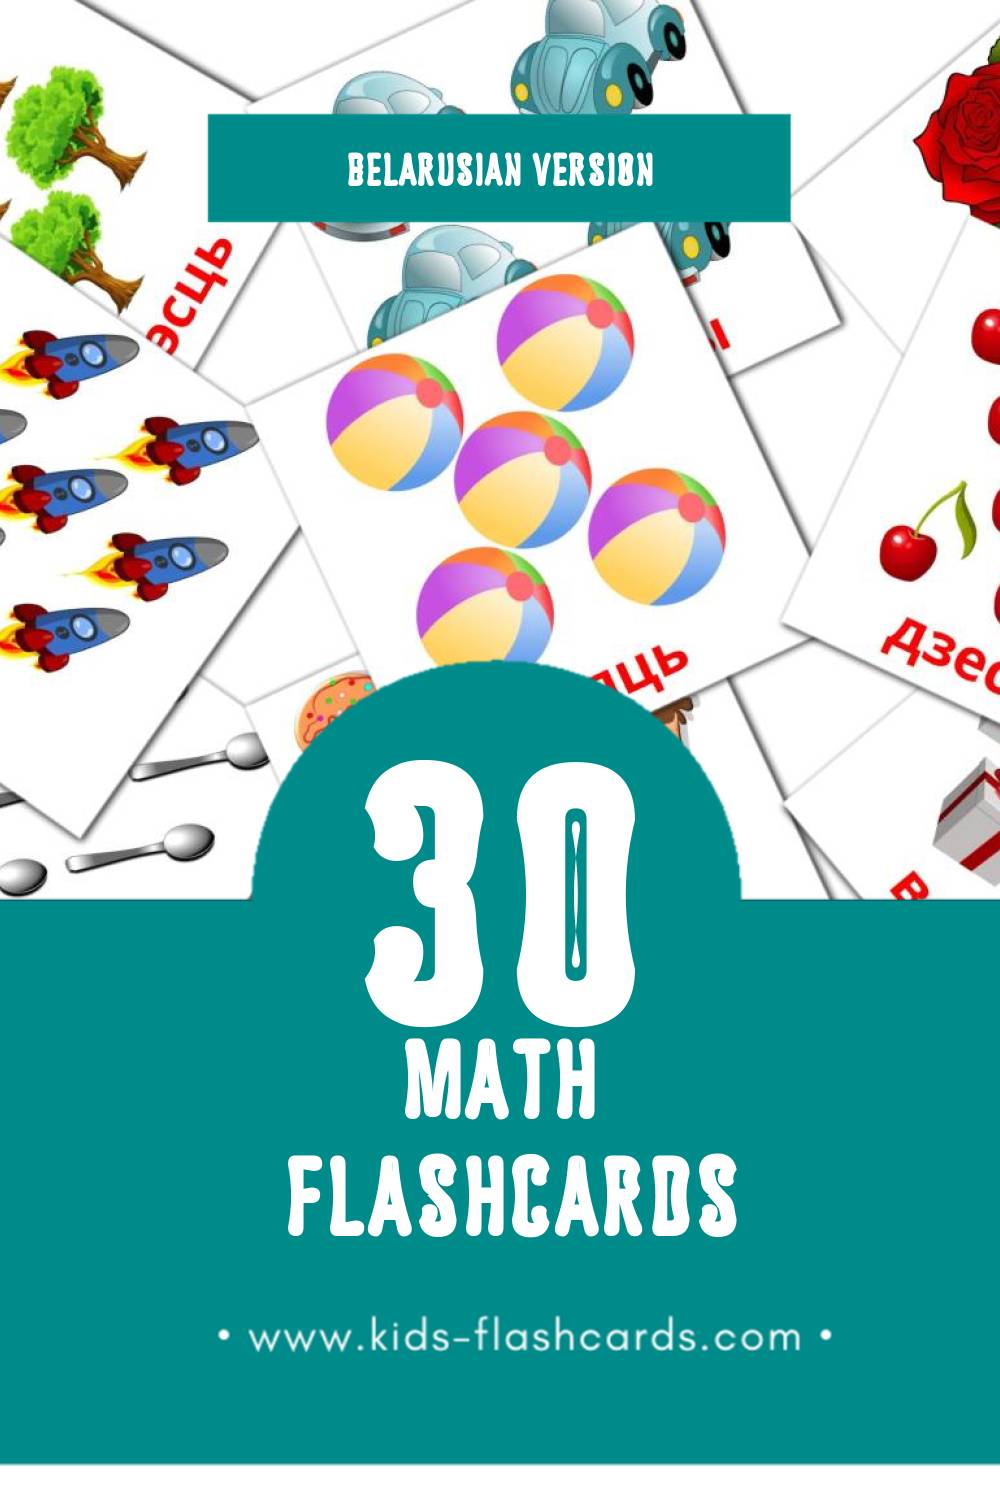 Visual Matemáticas Flashcards for Toddlers (10 cards in Belarusian)